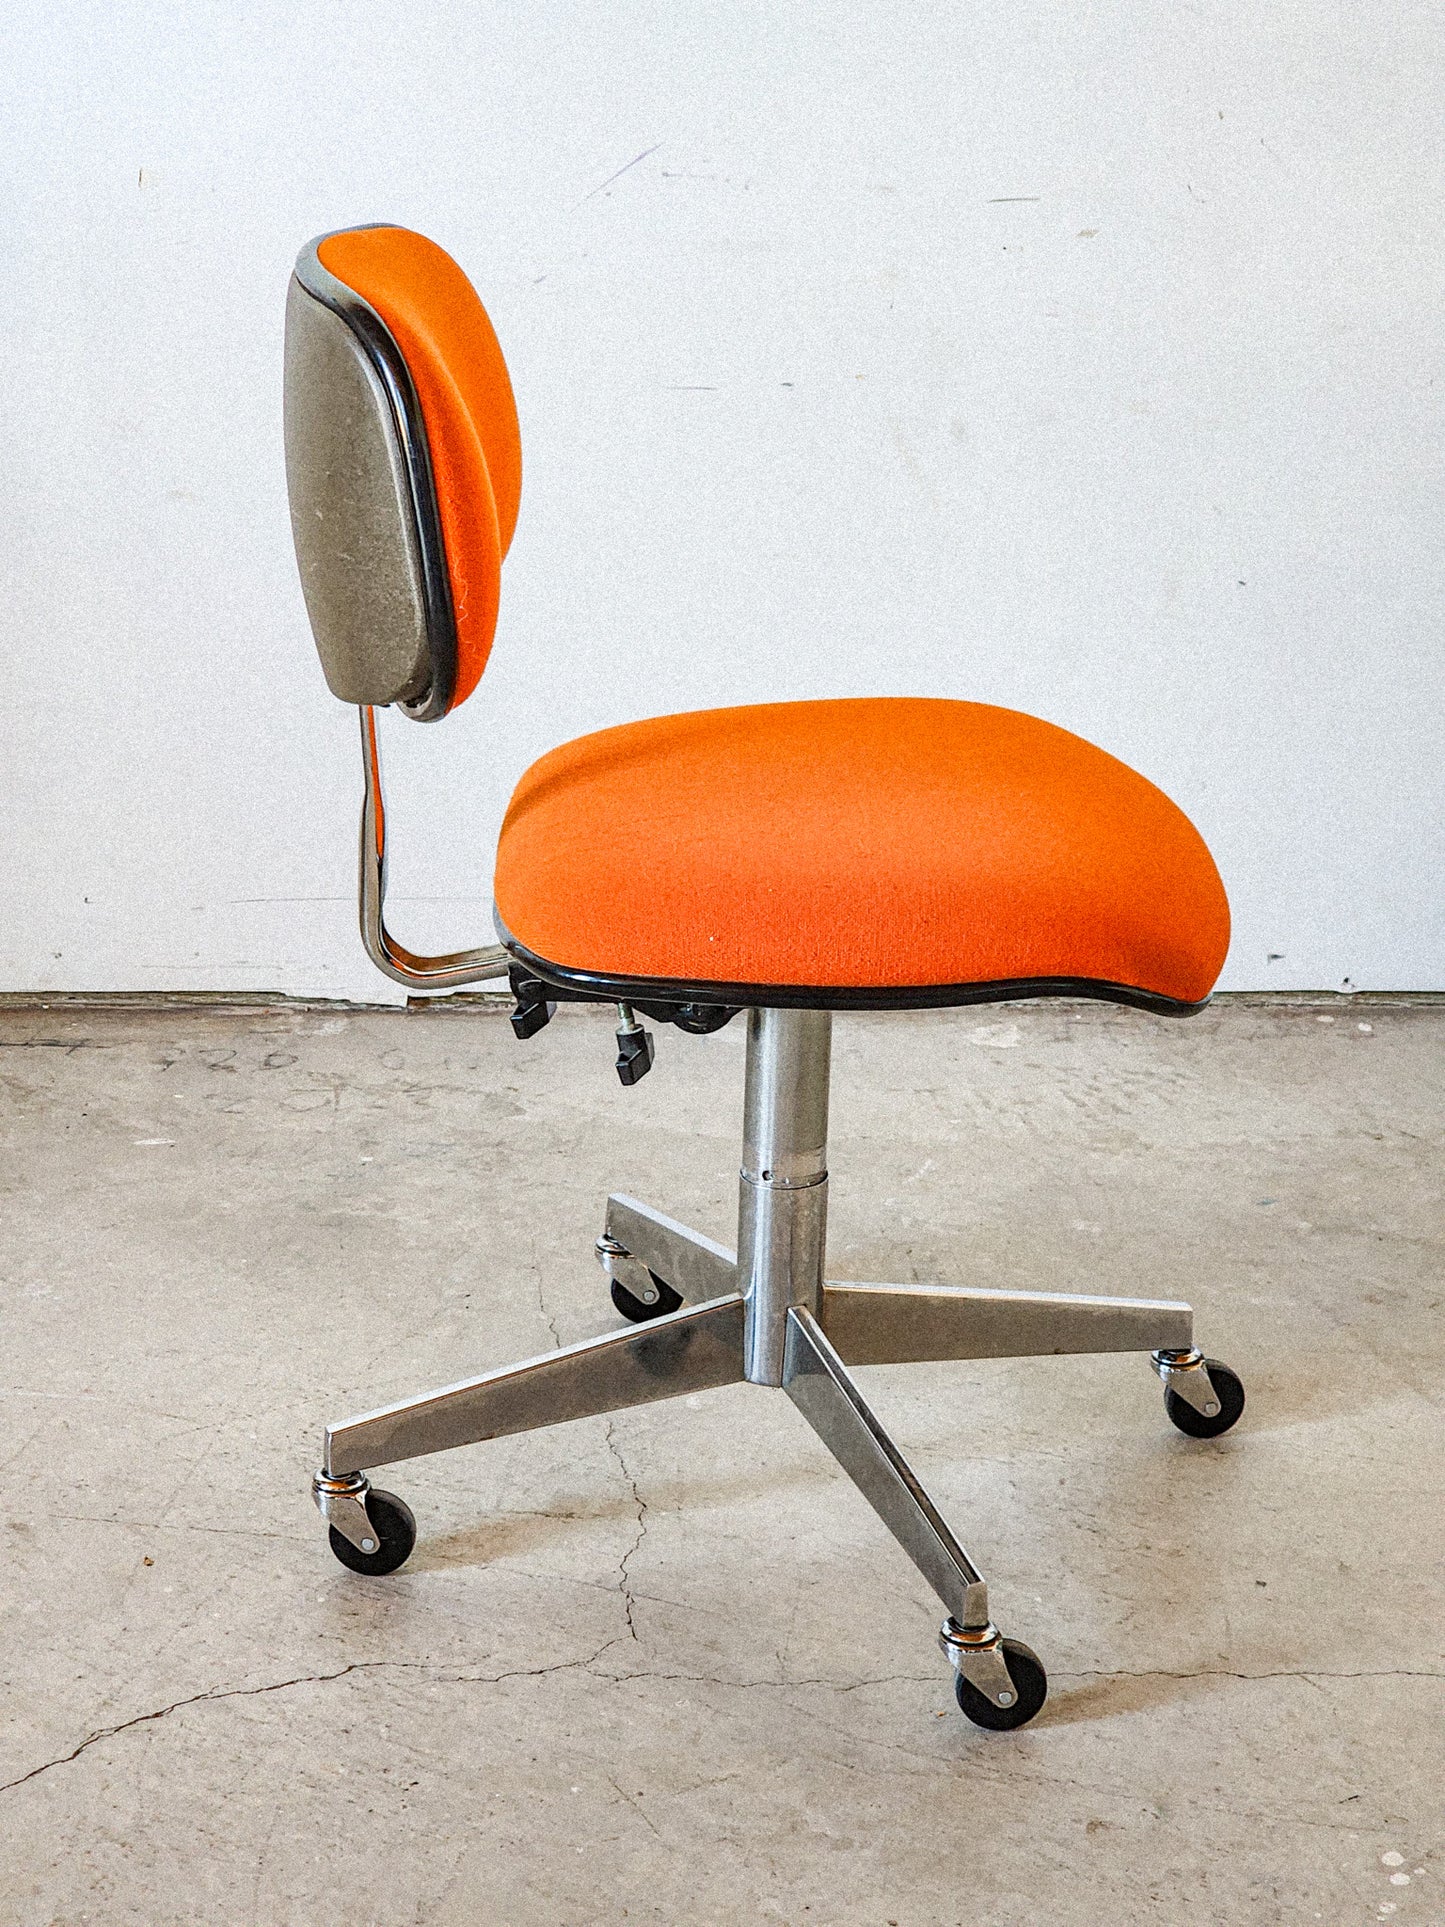 Vintage 1980s Steelcase Orange Rolling and Swiveling Office Chair - Reclaimed Mt. Goods